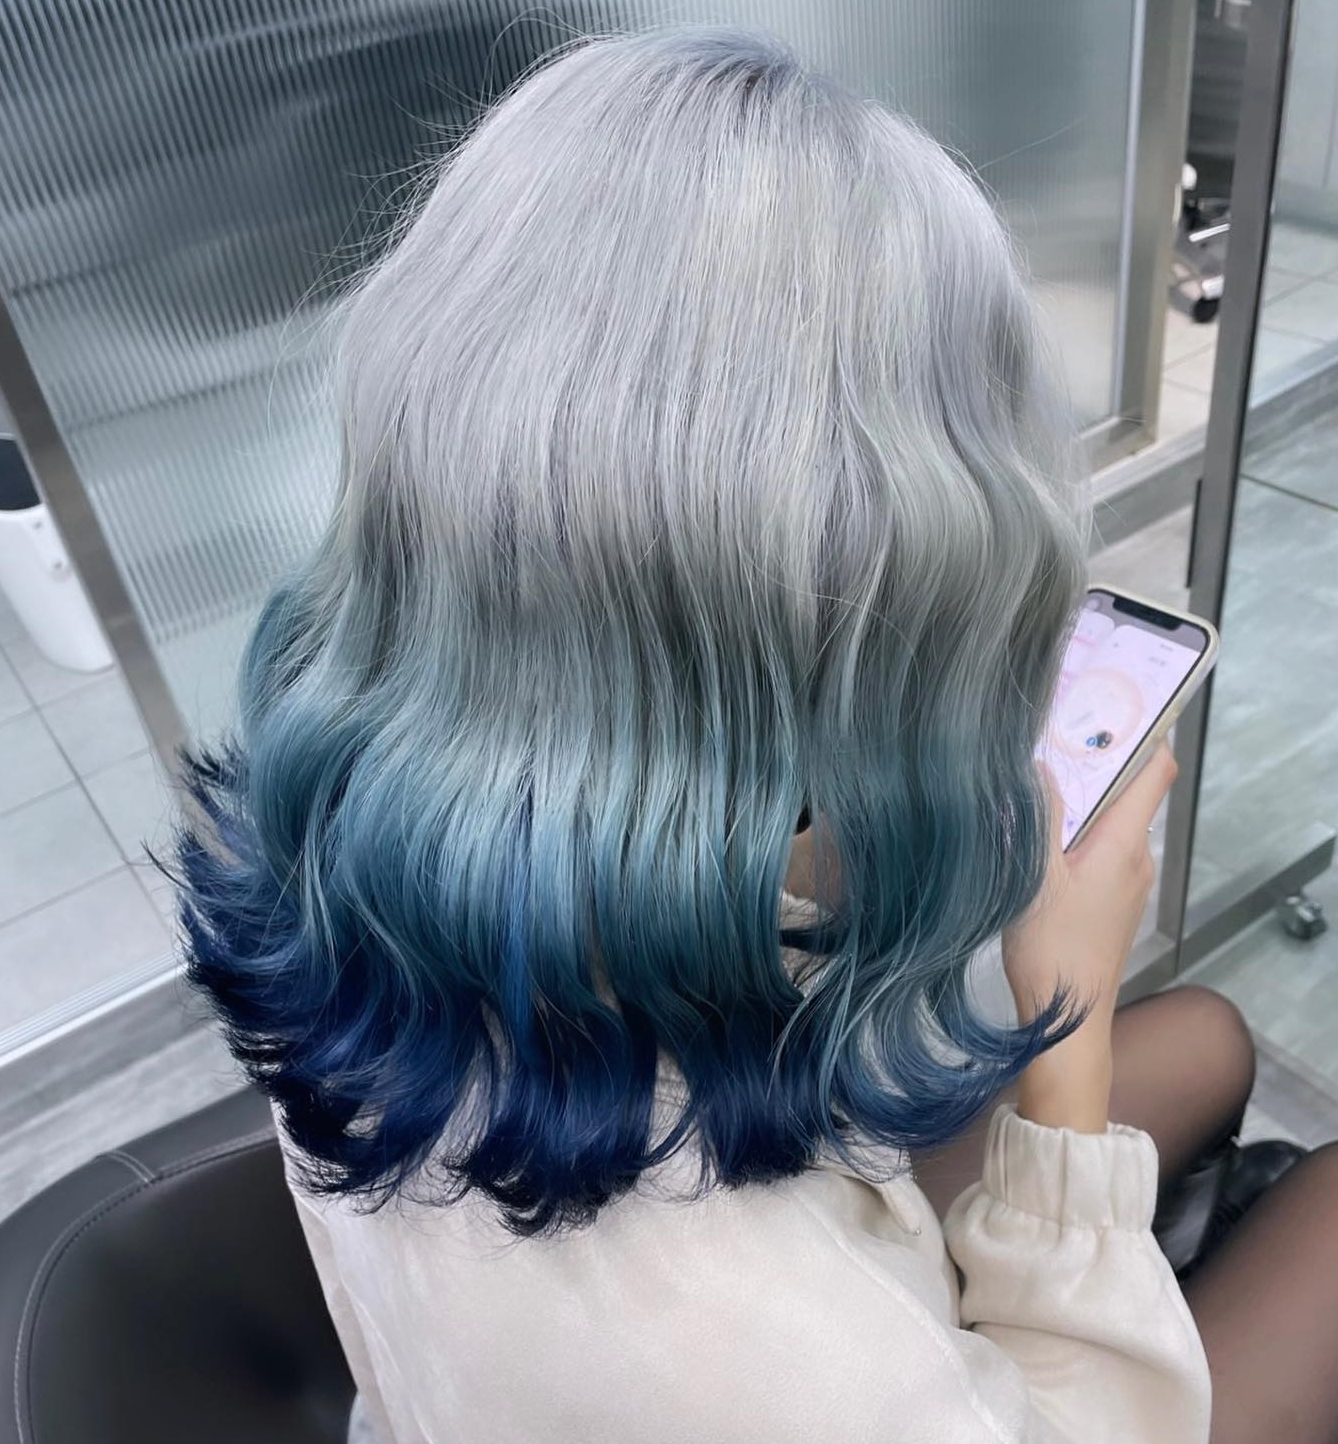 Wavy Mid-length Hair with Blue Ends